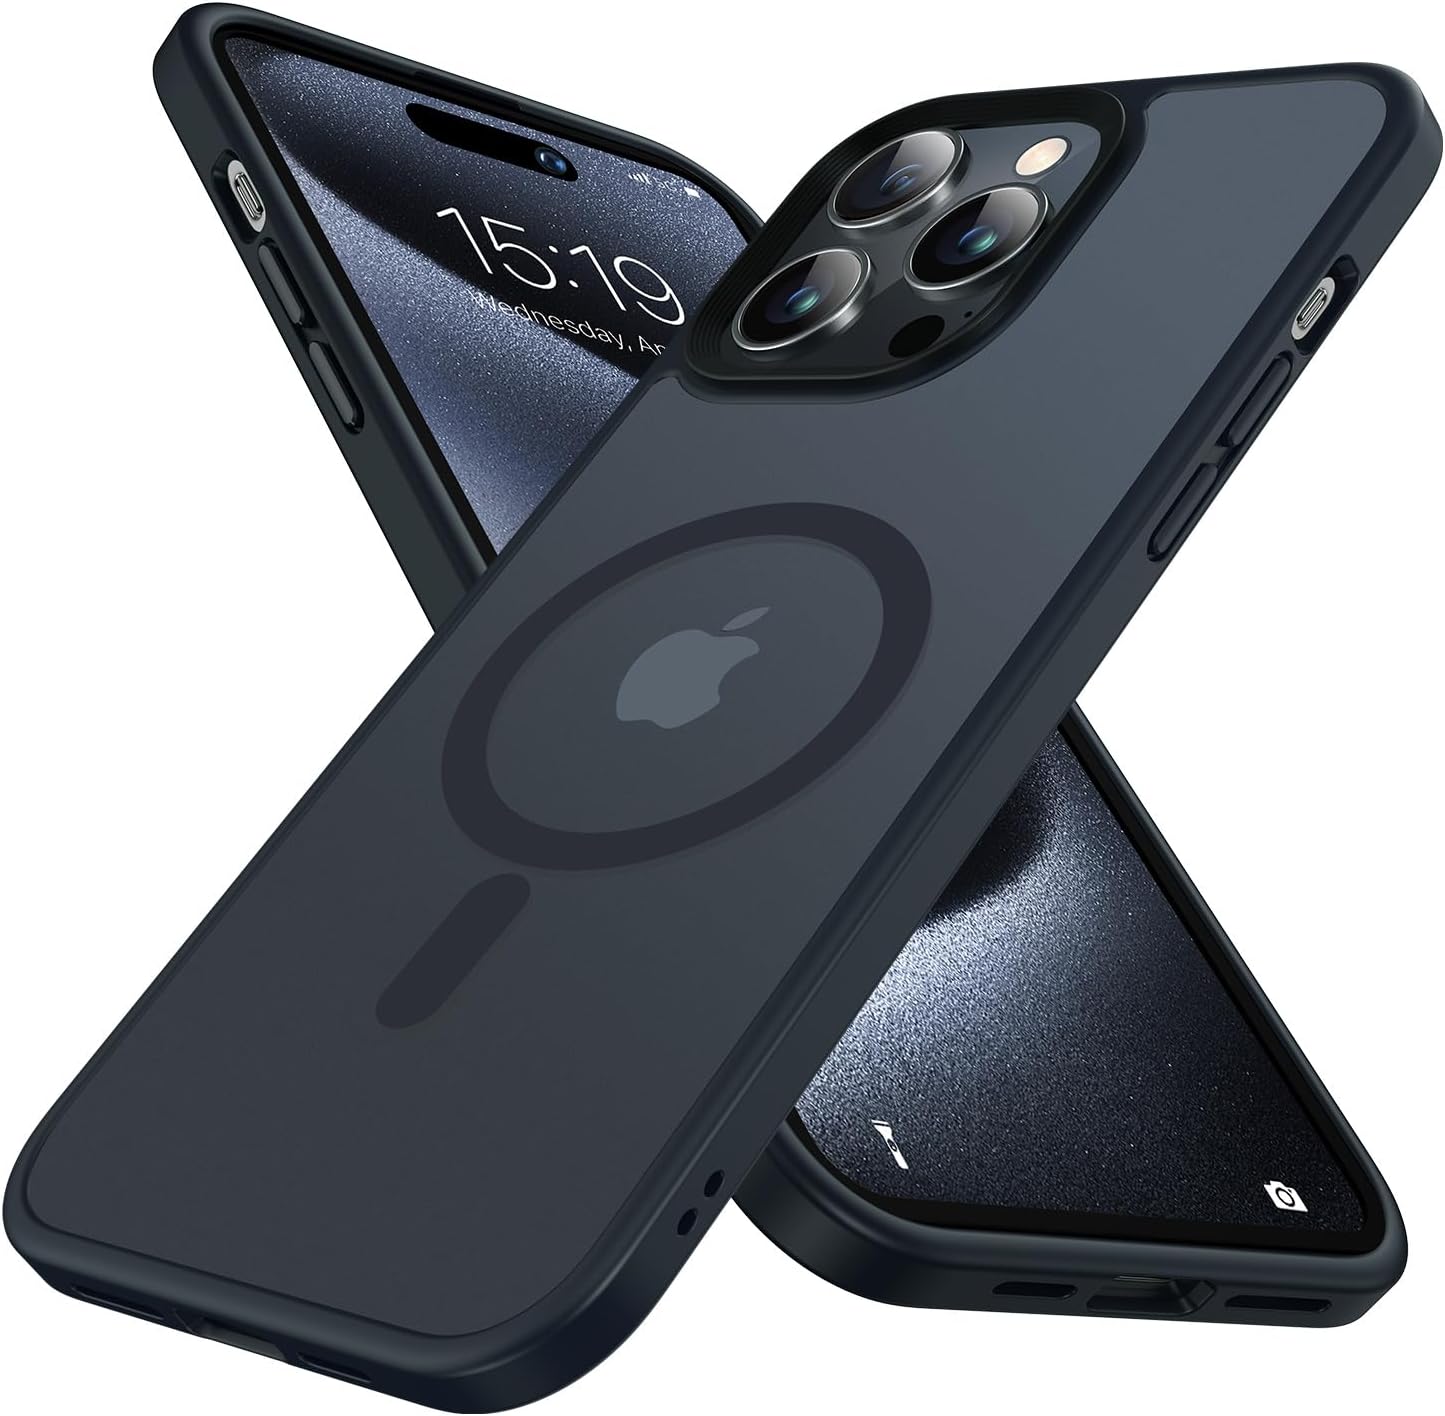 JETech Magnetic Case for iPhone 15 Pro 